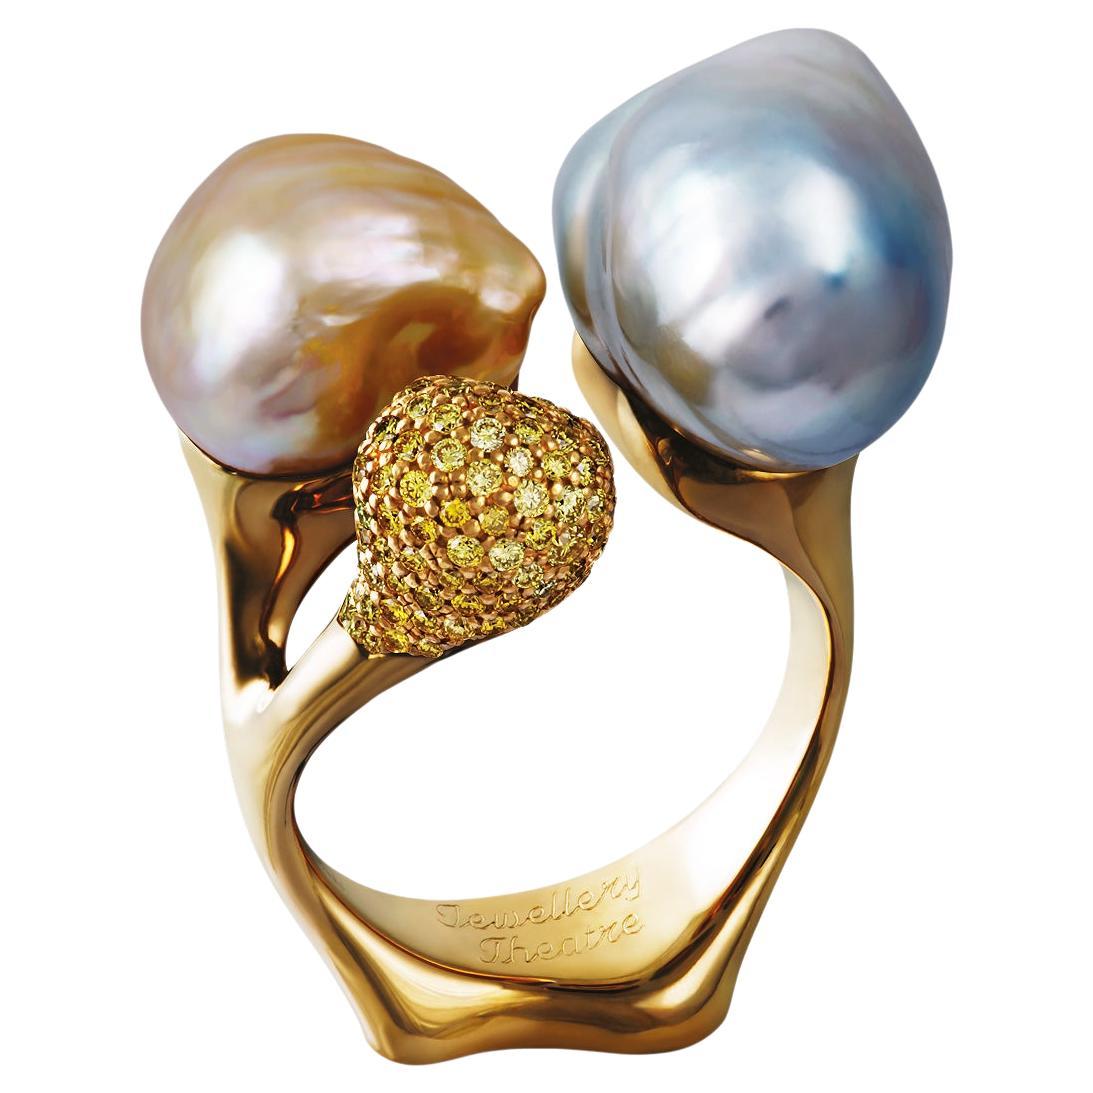 18 Karat Yellow Gold Cocktail Ring 1.49 Ct Yellow Diamonds and Baroque Pearls